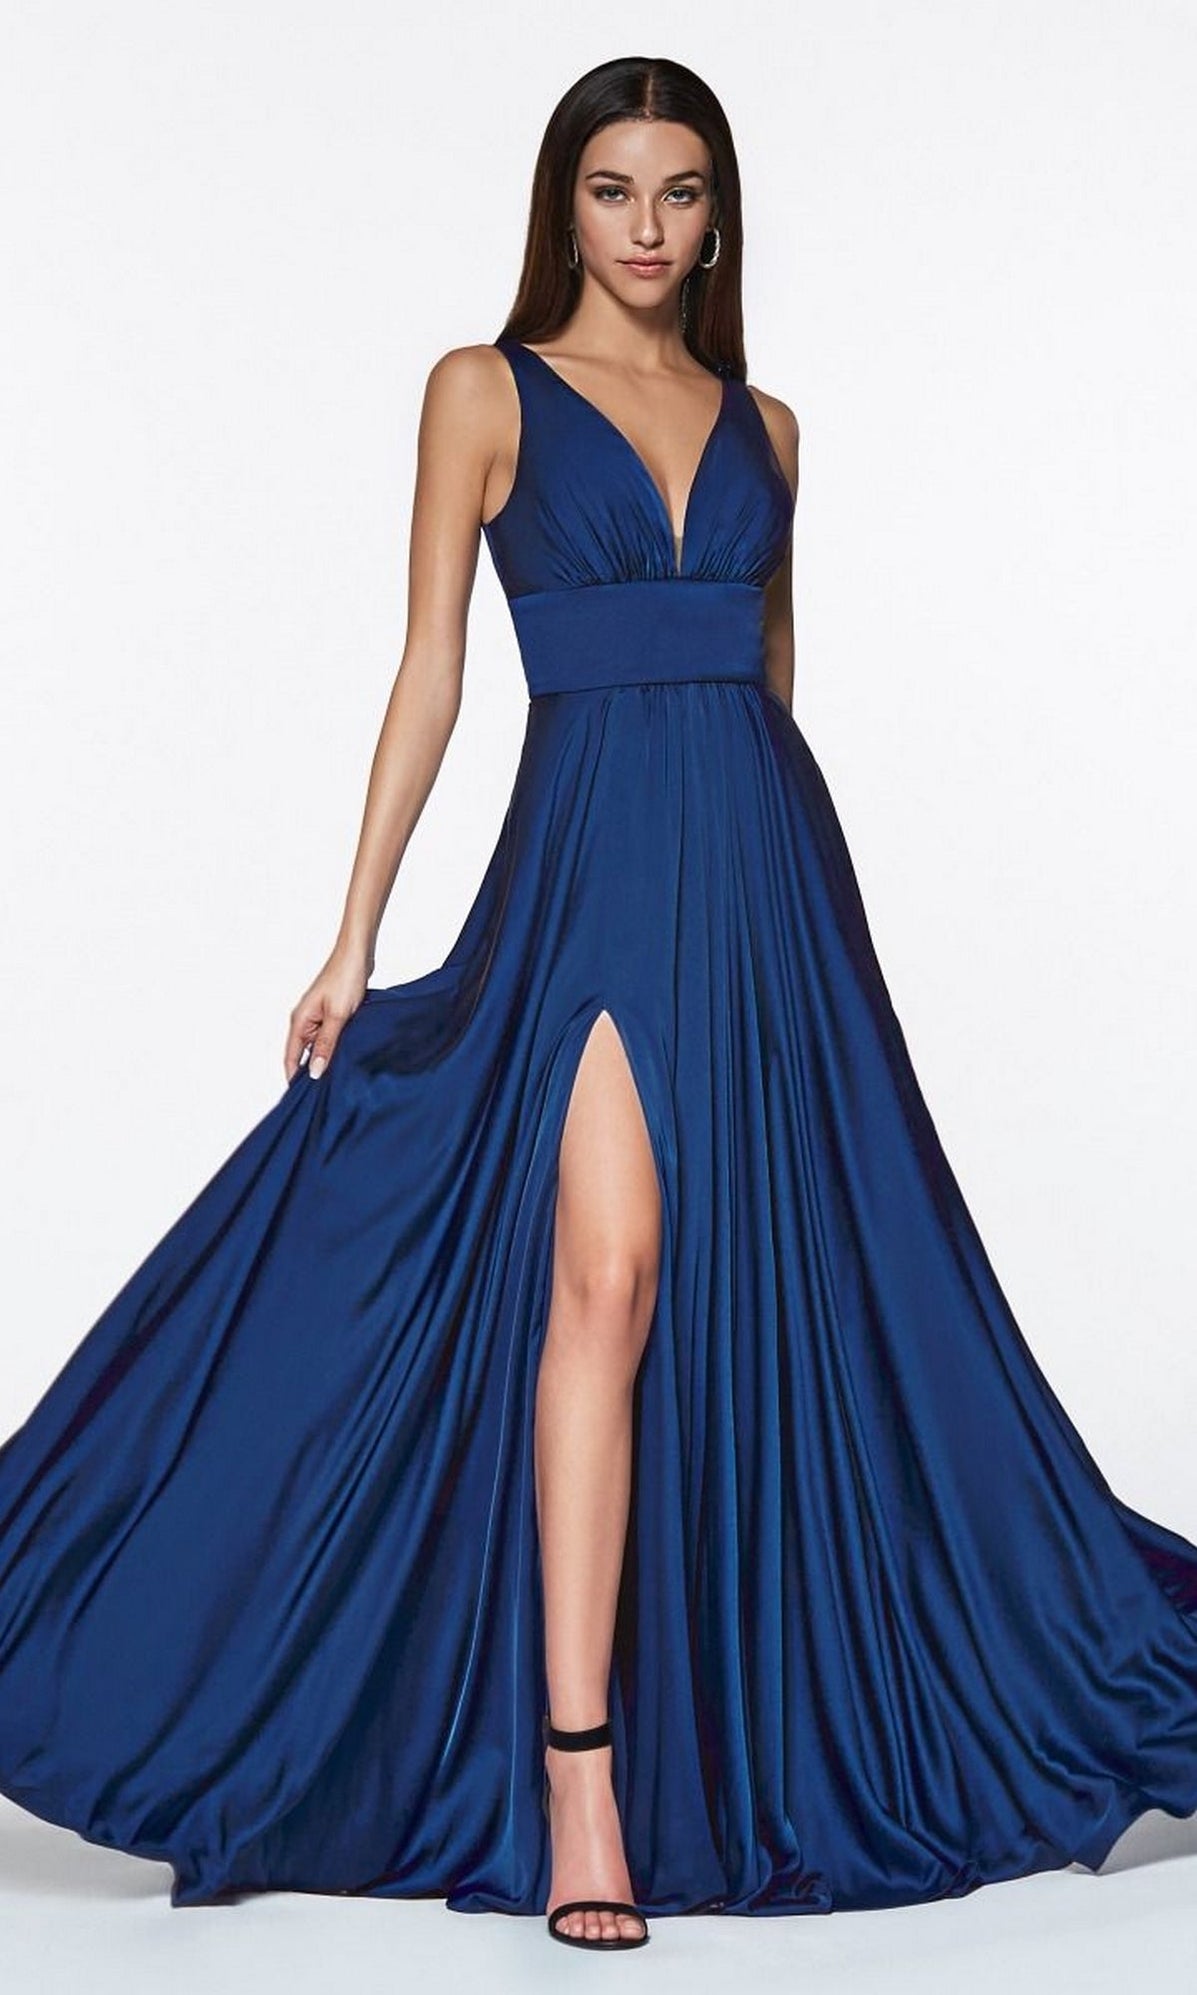 Simply Dresses - Evening Gowns, Cocktail Party Dresses